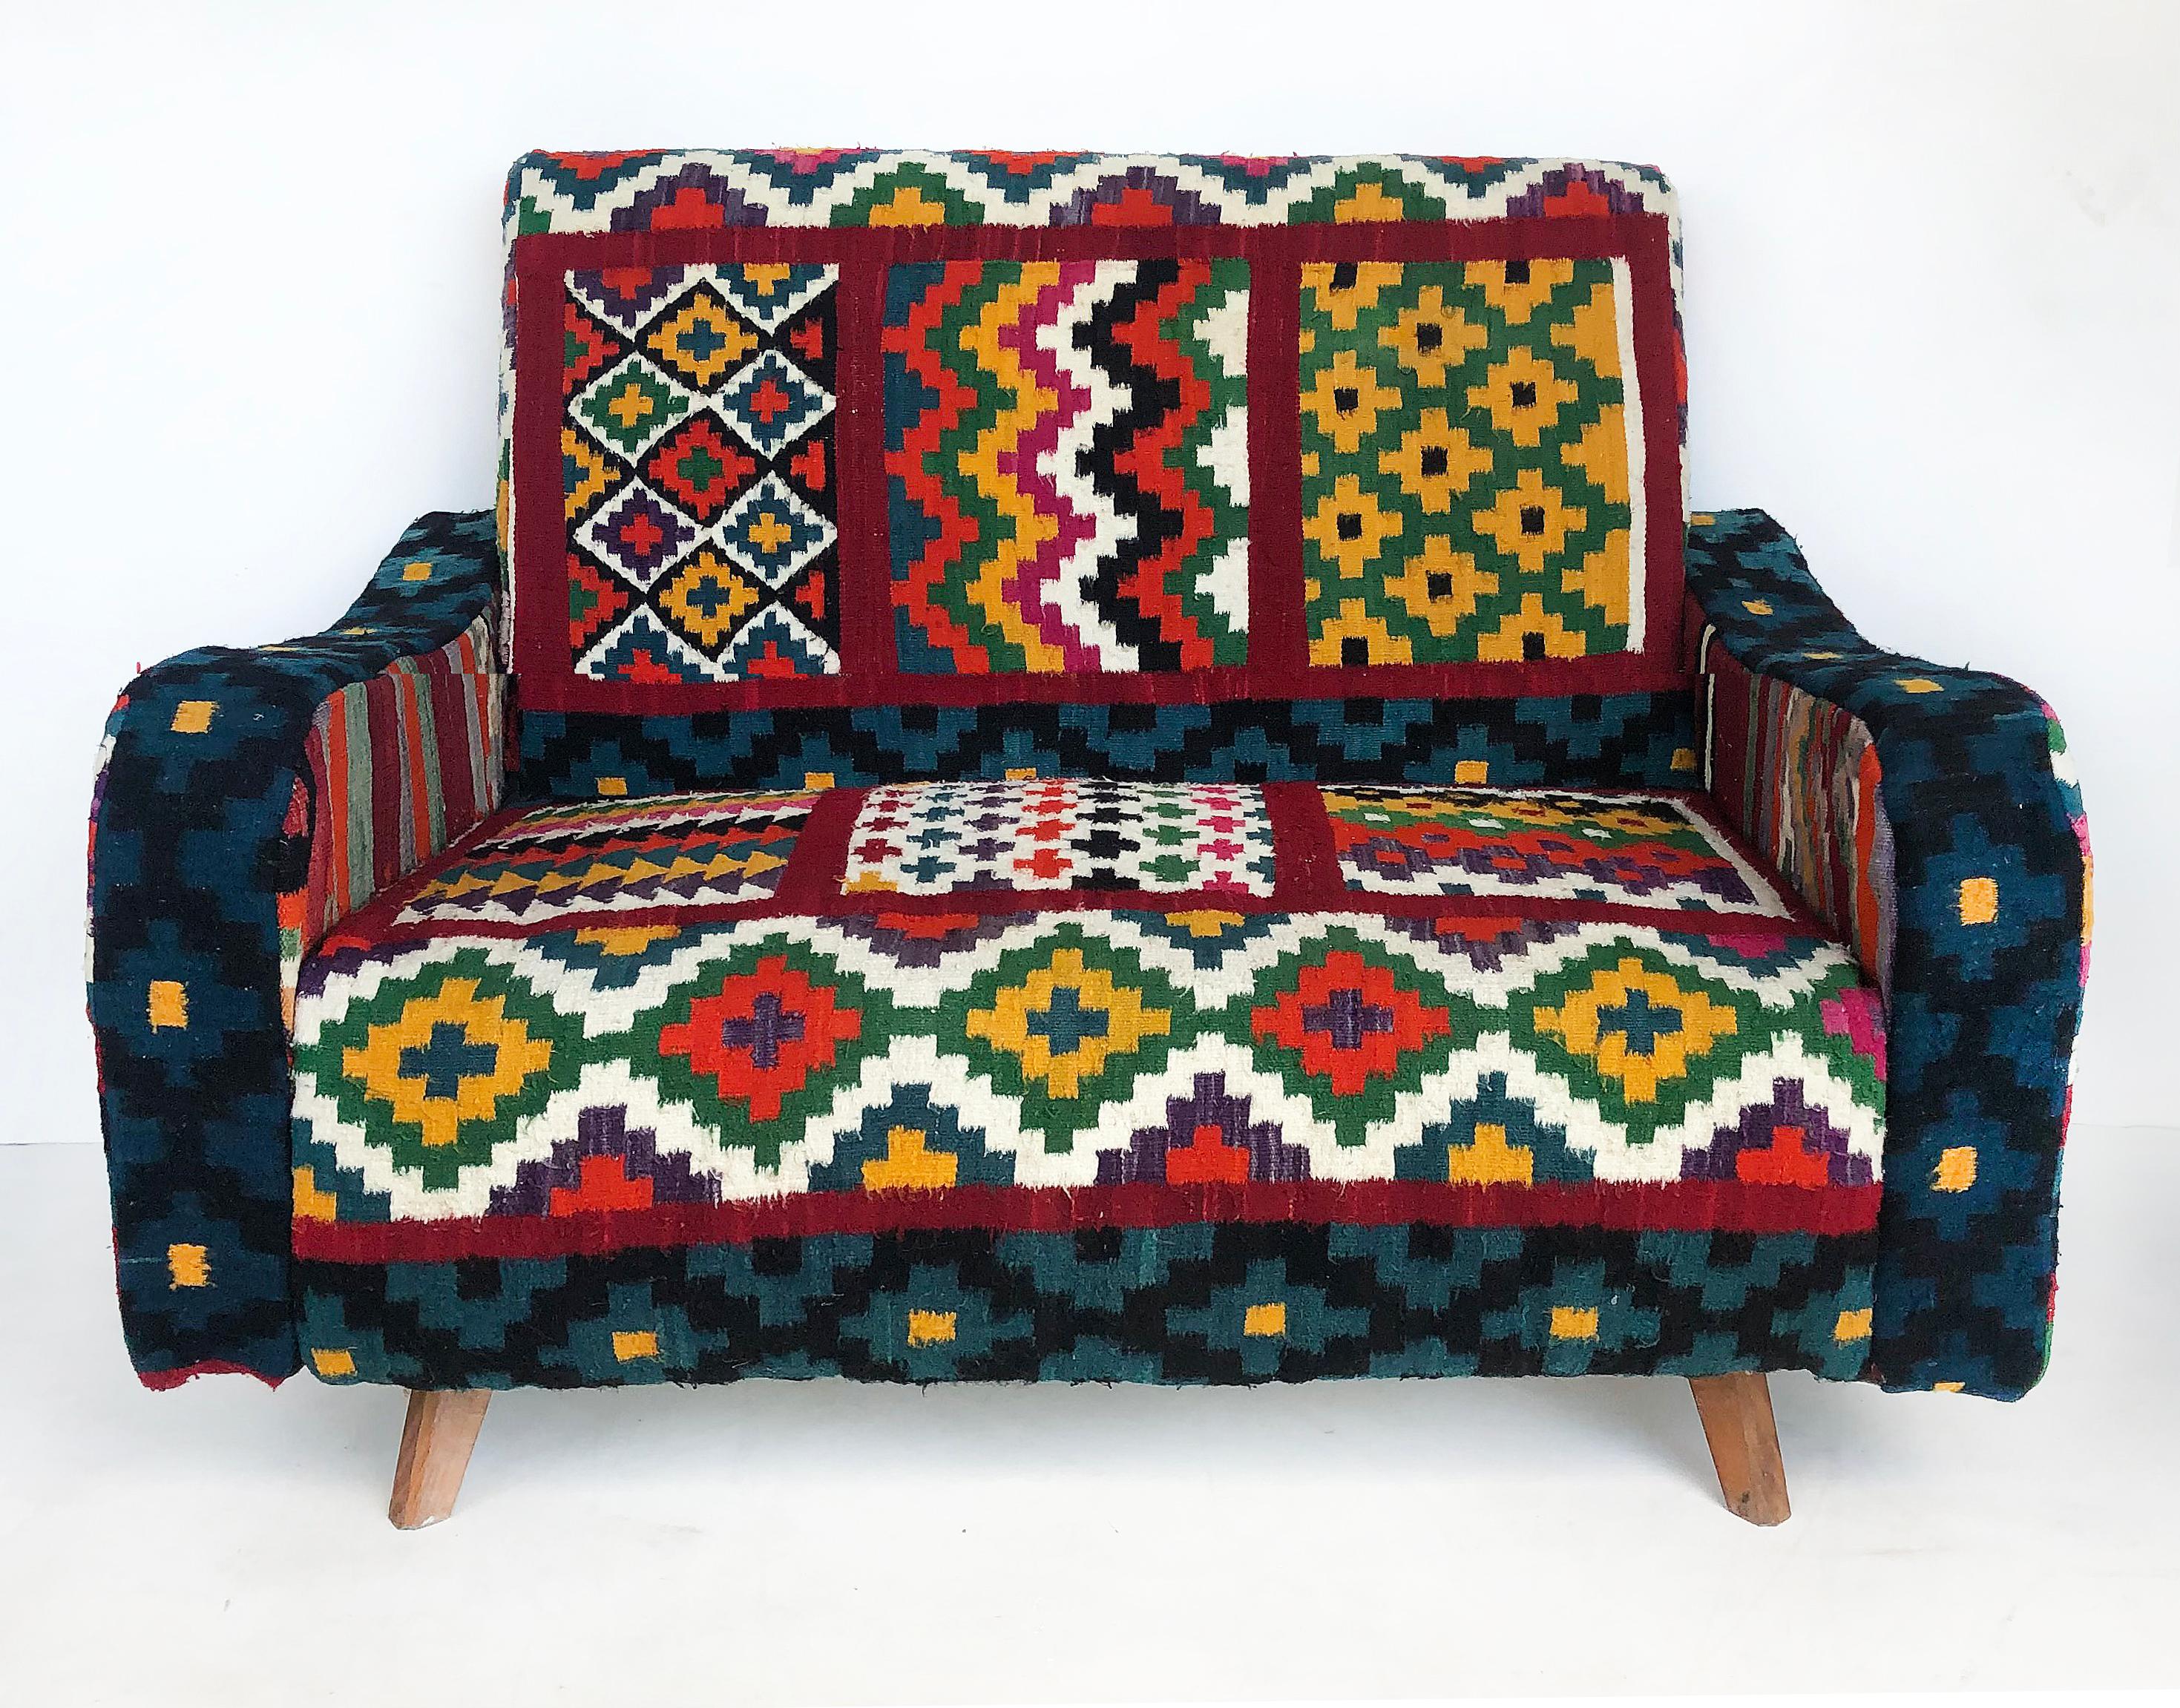 Tunisian (North Africa) Woven Wool Textile Loveseat with Brightly Colored Fabric

Offered for sale is a Tunisian (North African) woven wool textile upholstered loveseat with angular, tapering conical legs. This brightly colored sofa is being offered